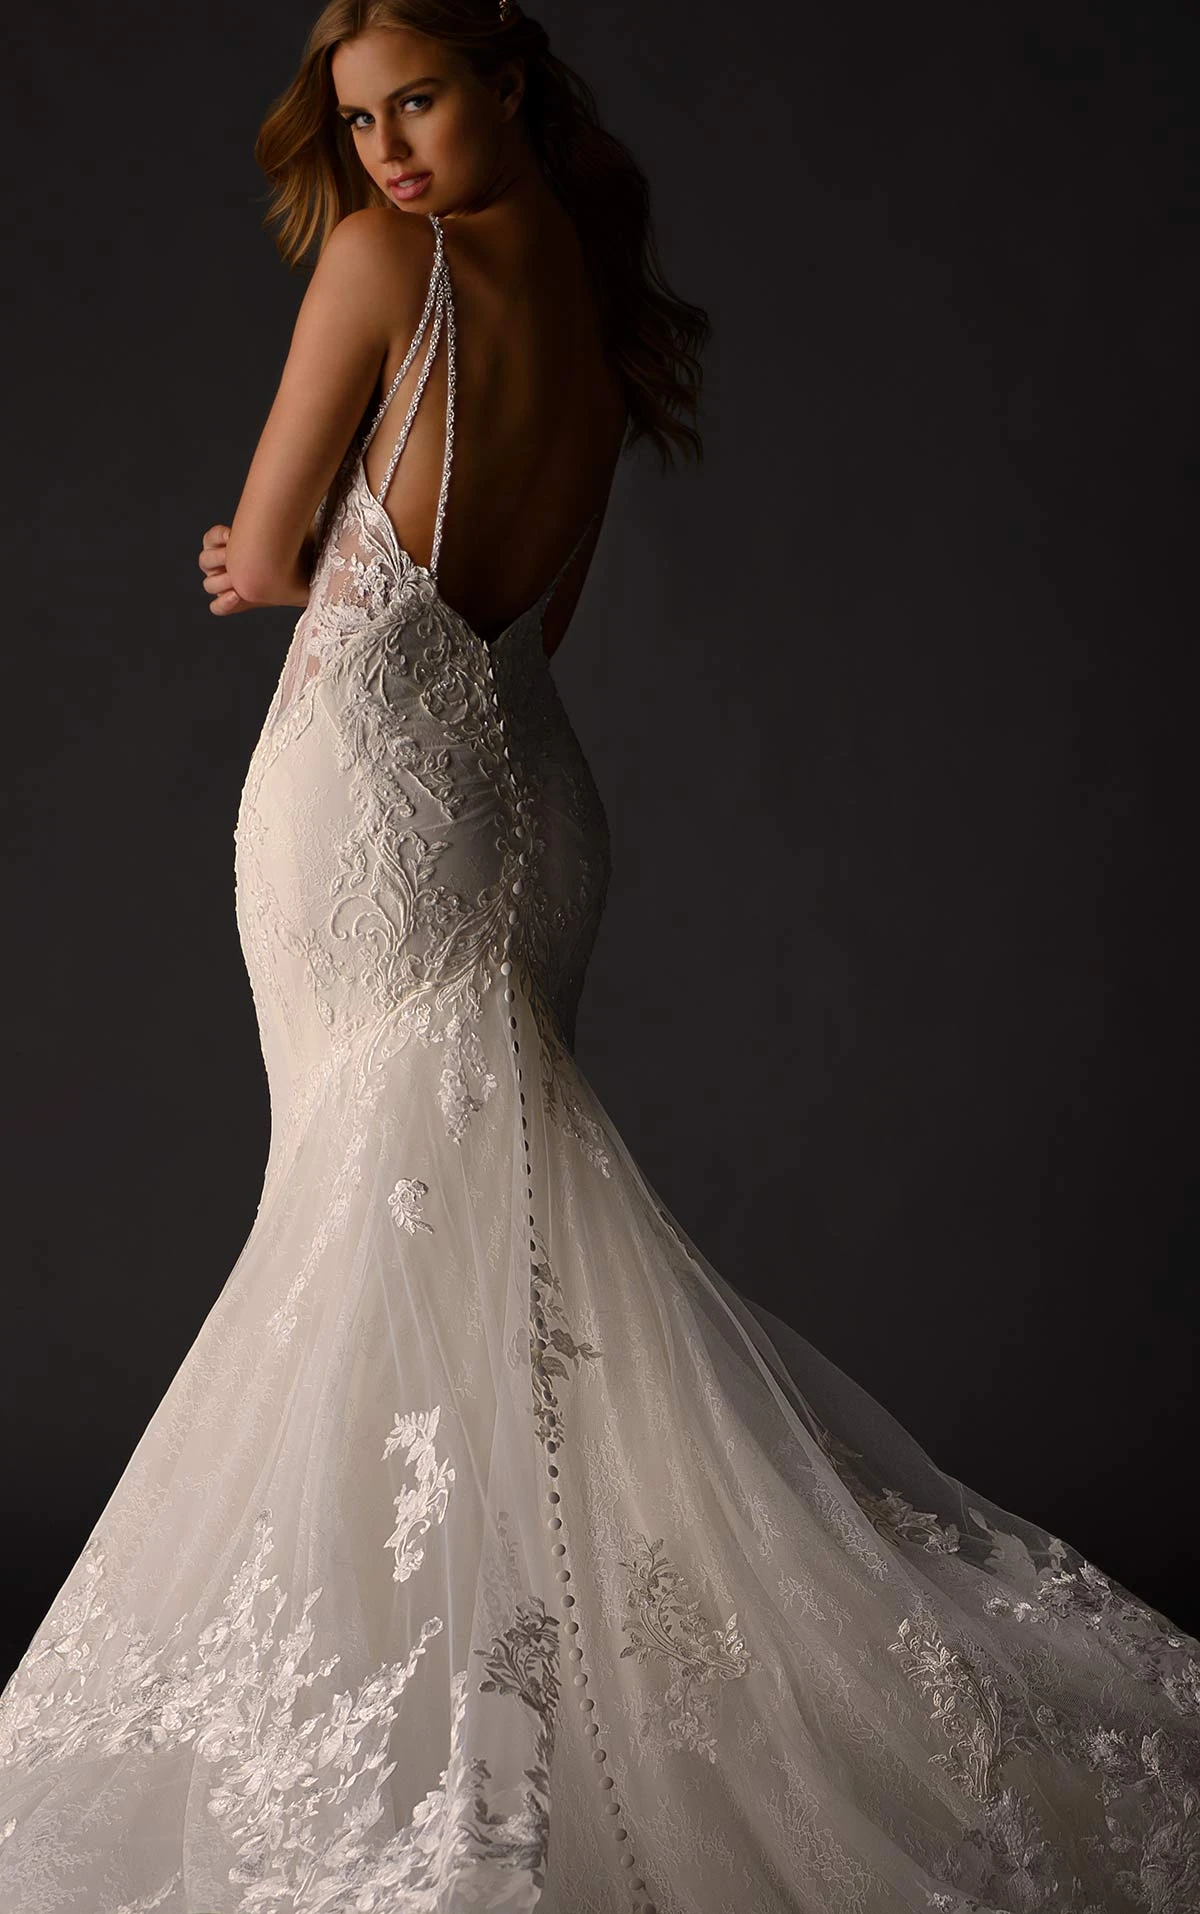 1171 All-Over Lace Fit-and-Flare Wedding Dress with Sheer Sides  by Martina Liana